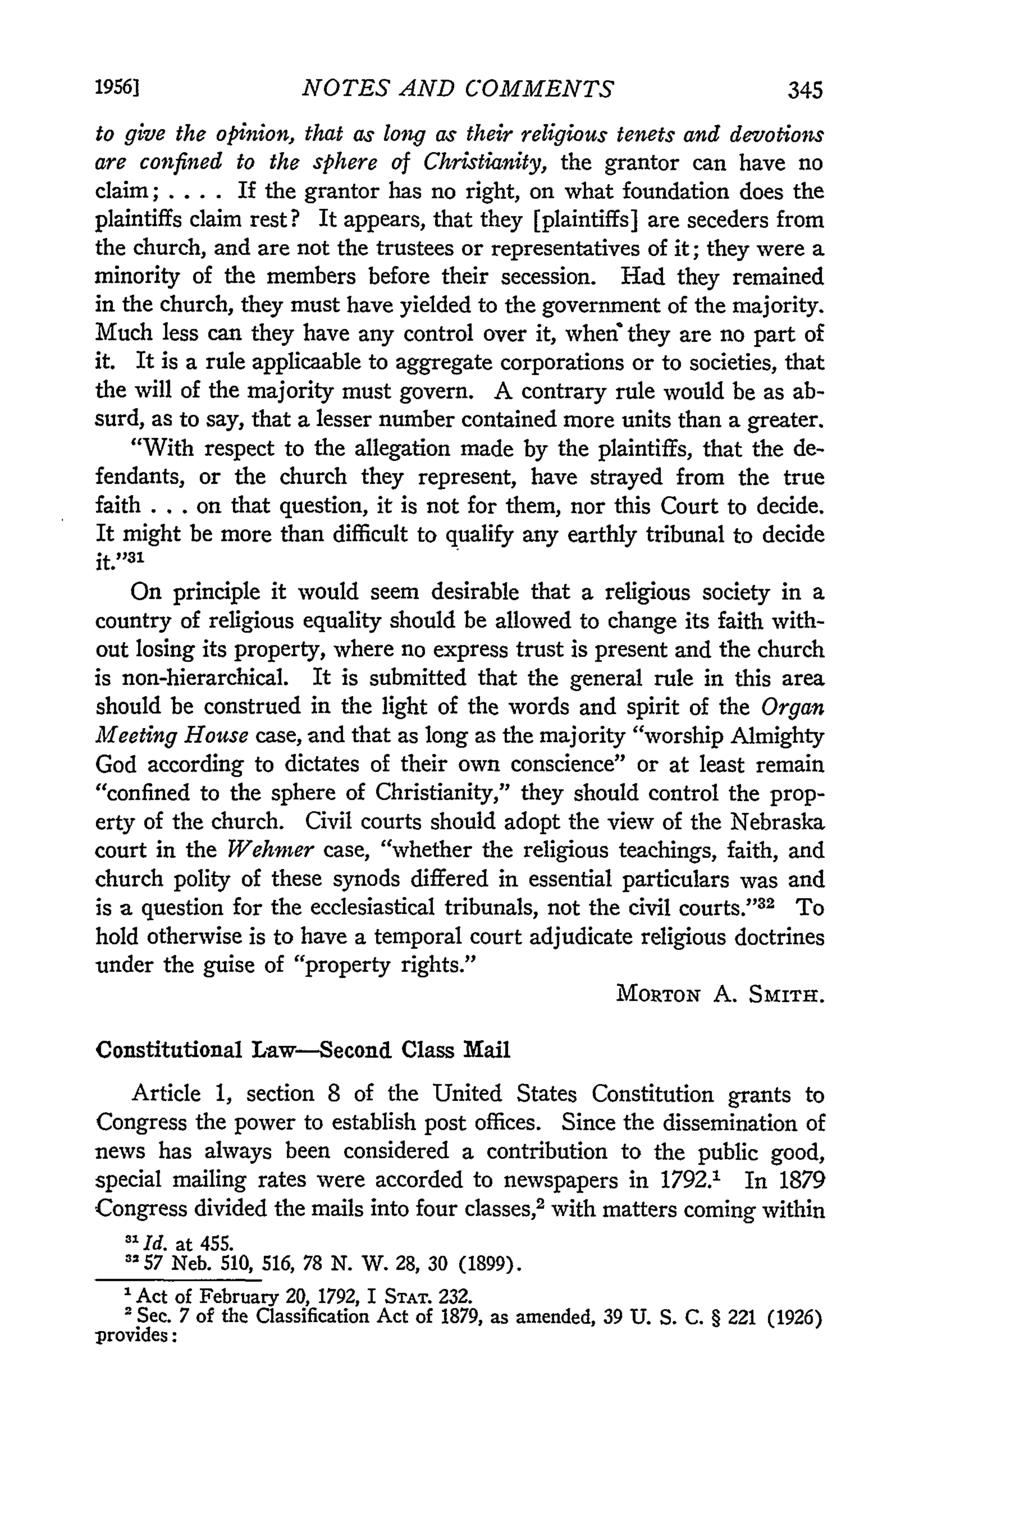 1956] NOTES AND COMMENTS to give the opinion, that as long as their religious tenets and devotions are confined to the sphere of Christianity, the grantor can have no claim;.